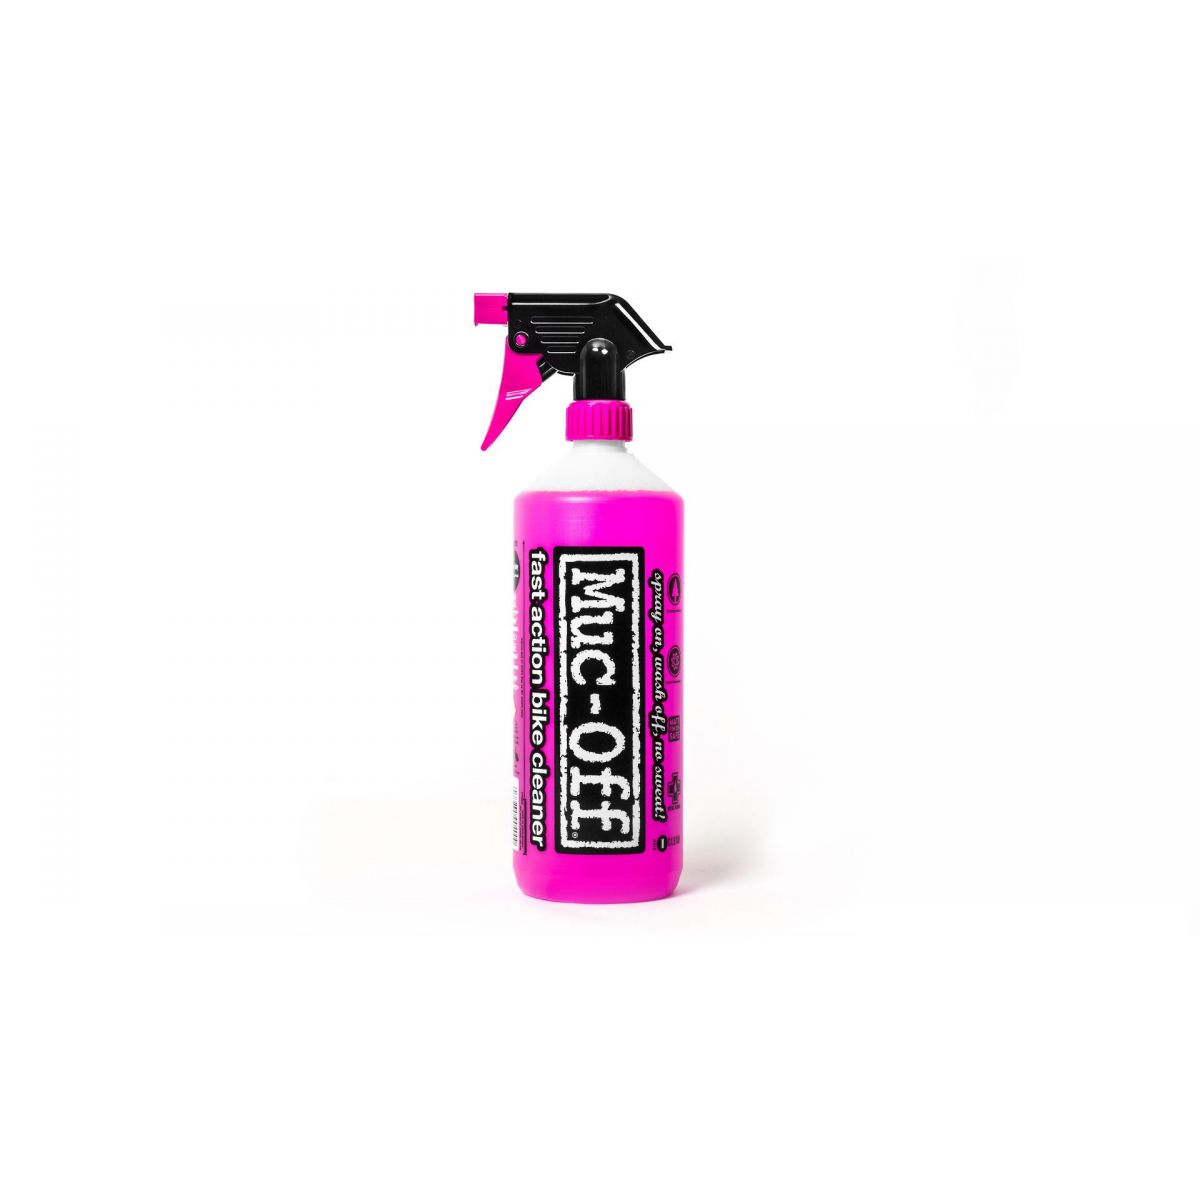 Kit Muc-Off Limpiador 1L + Spary Protector 500ml